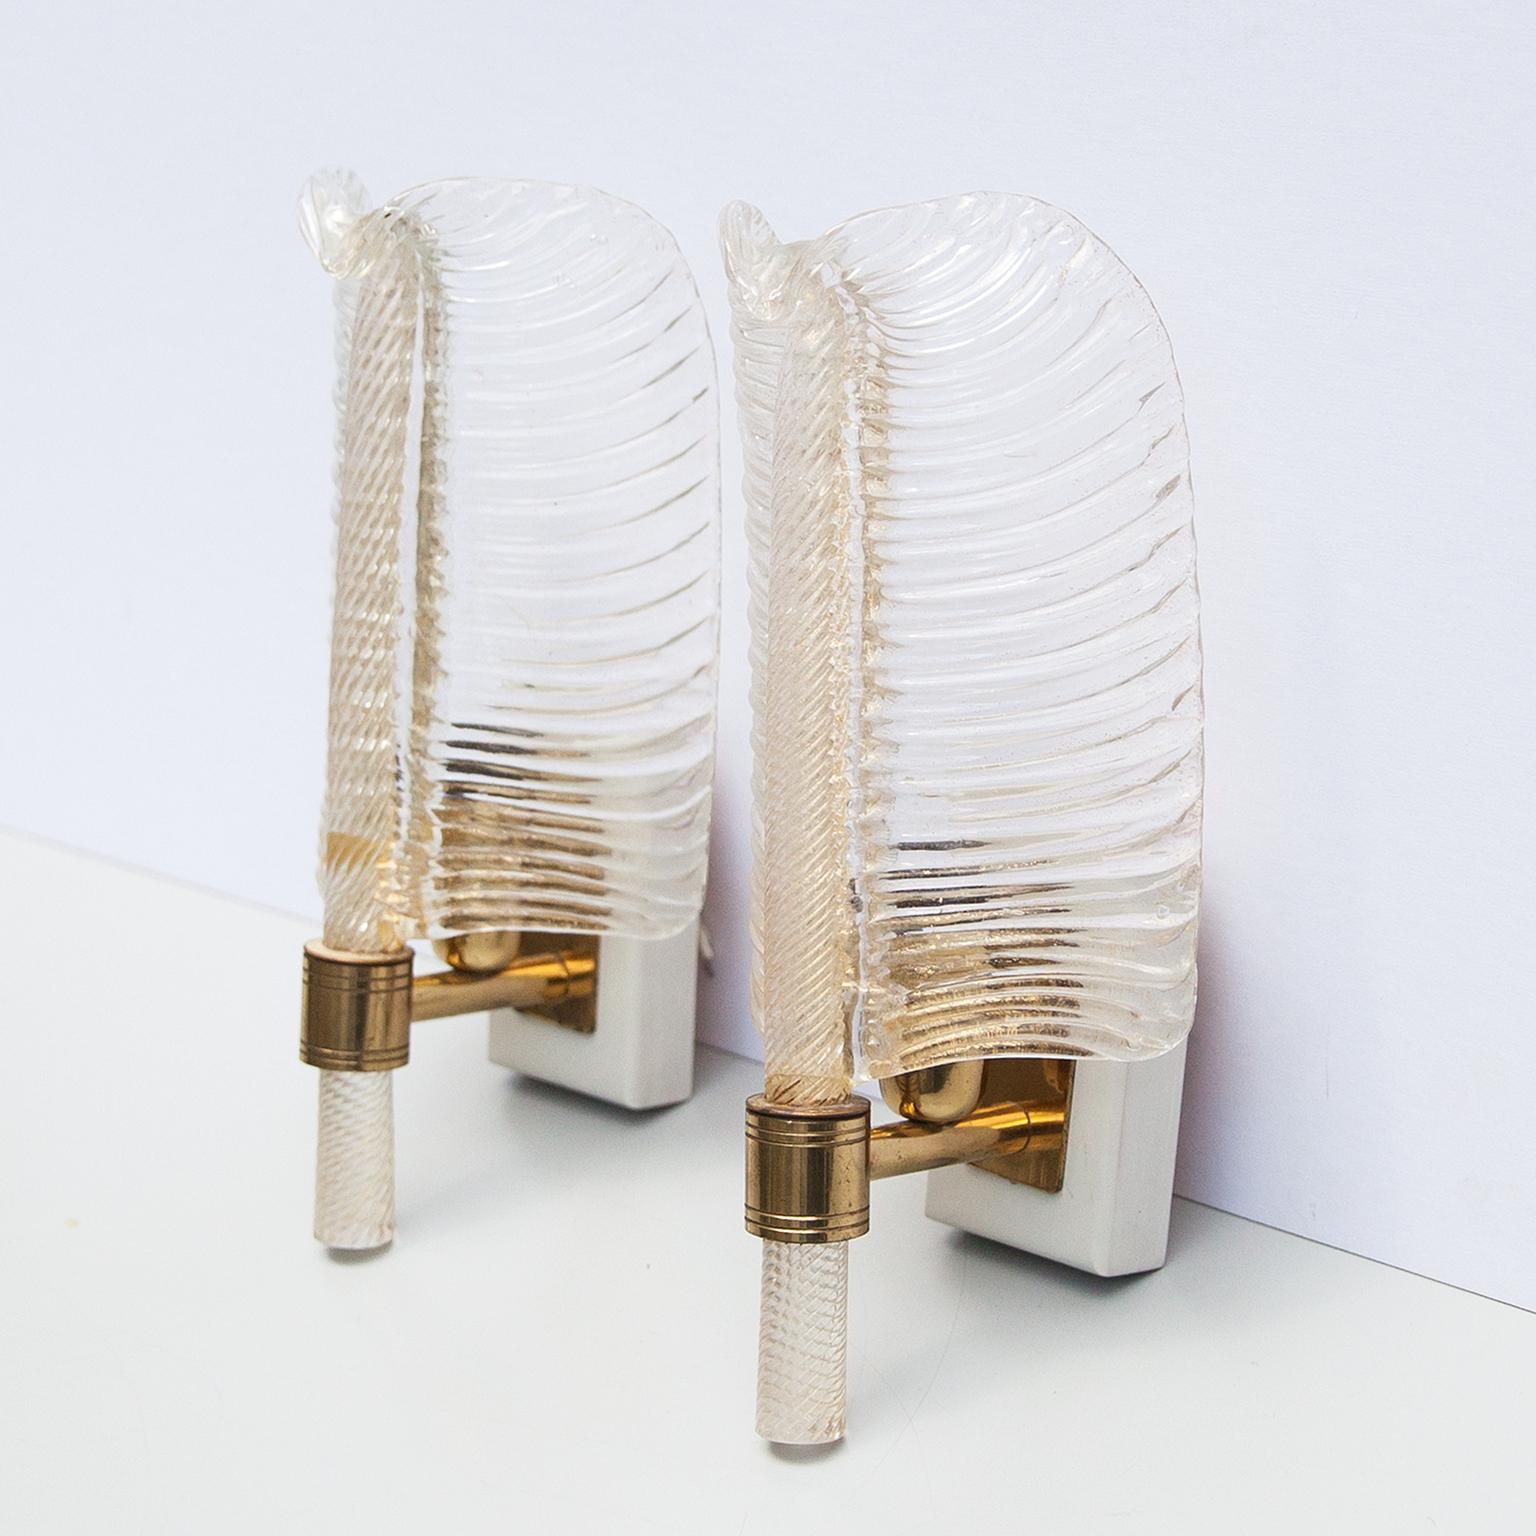 Pair of Murano glass sconces made by Barovier e Toso, Italy, 1960s.
The glass is hand blown and is infused with gold using the Foglia d’oro technique, the reverse side of the sconces were made using the Rugiada technique with minute fragments of